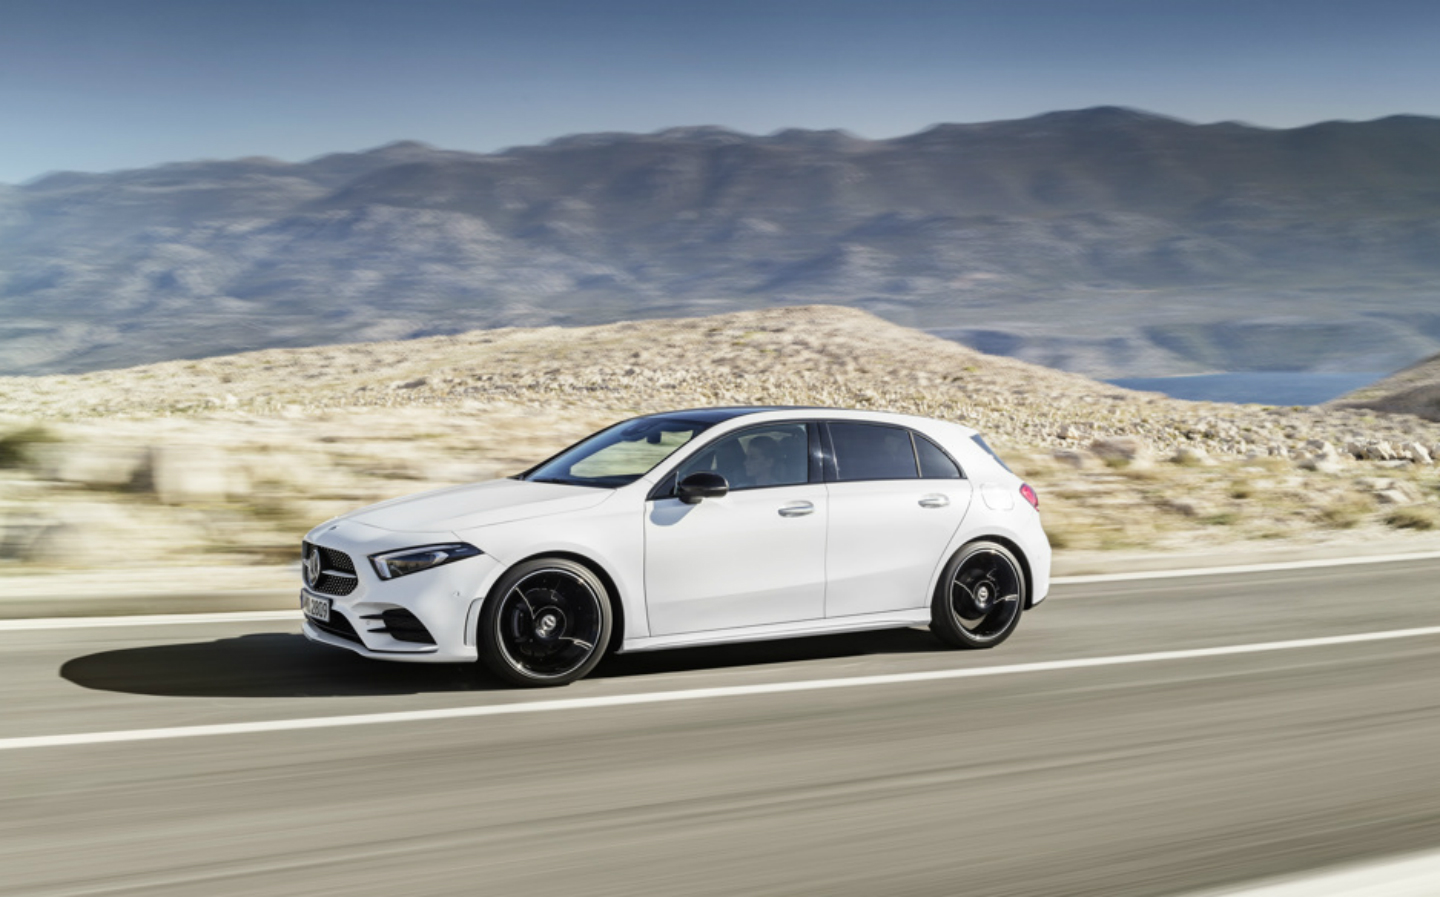 New 2018 Mercedes A-Class: AI for family hatch but no eco hybrid versions